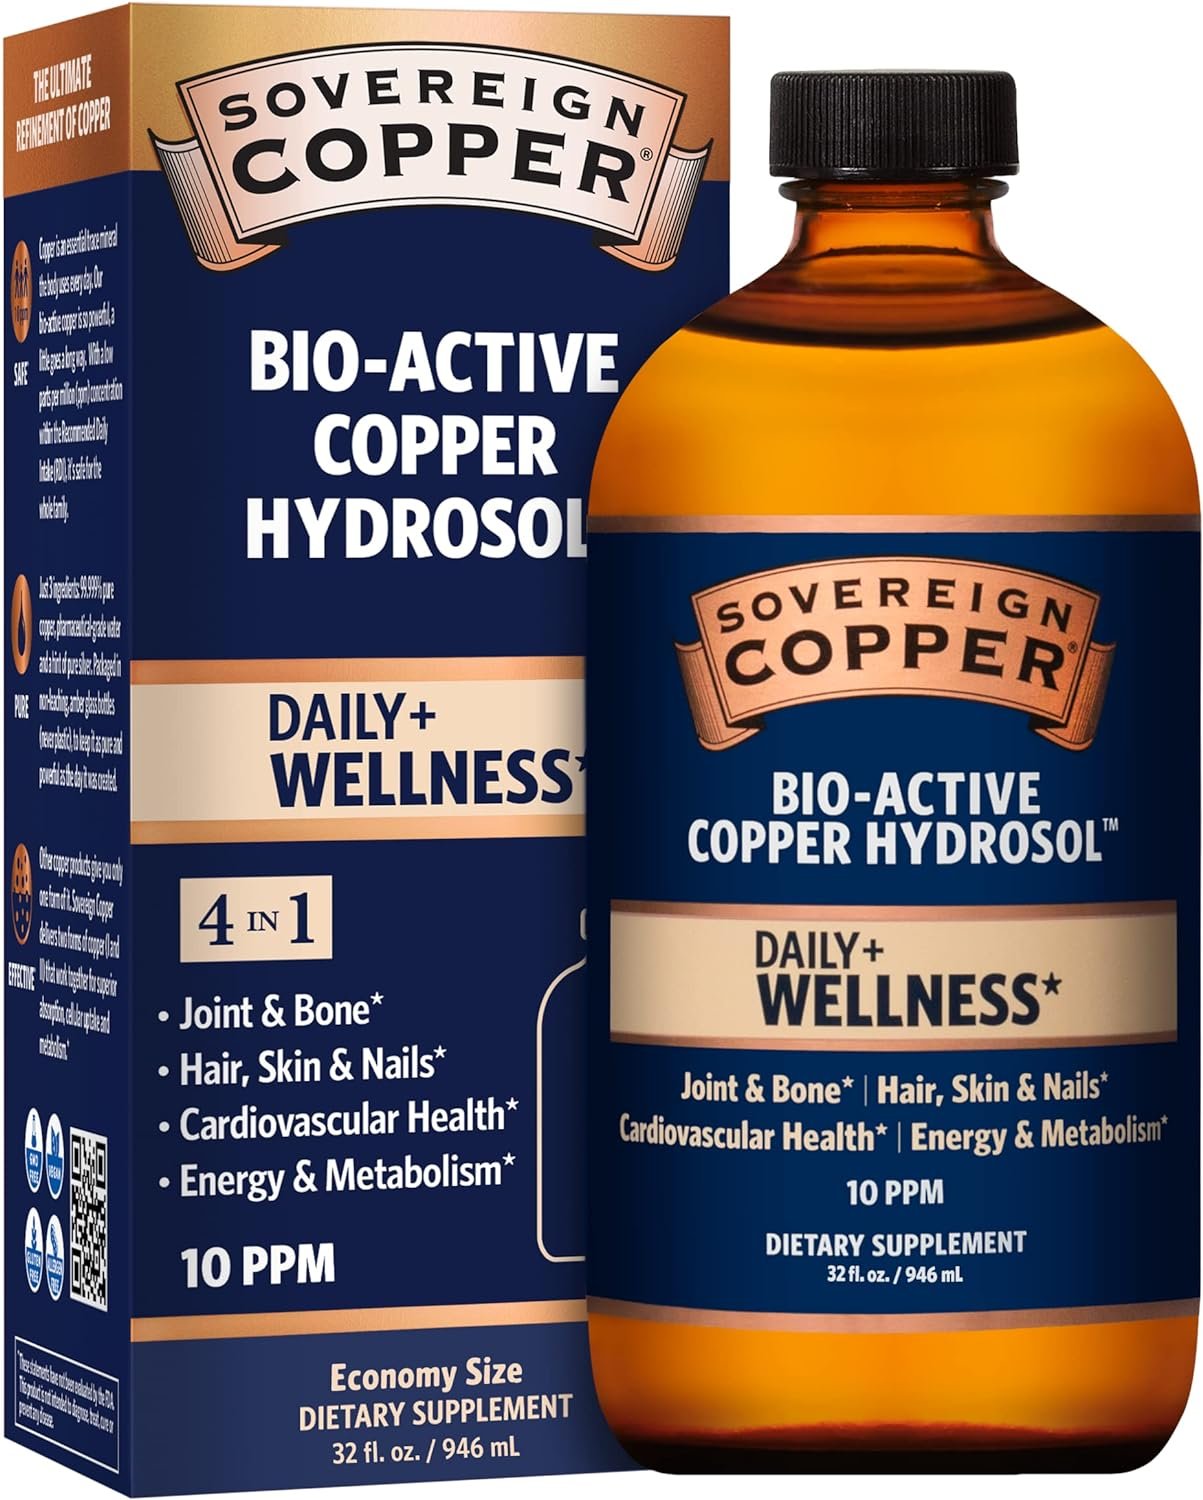 Sovereign Copper Bio-Active Copper Hydrosol, Daily+ 4-in-1 Wellness Supplement for Joint and Bone*, Hair, Skin and Nails*, Cardiovascular Health* and Energy and Metabolism Support*, 16oz